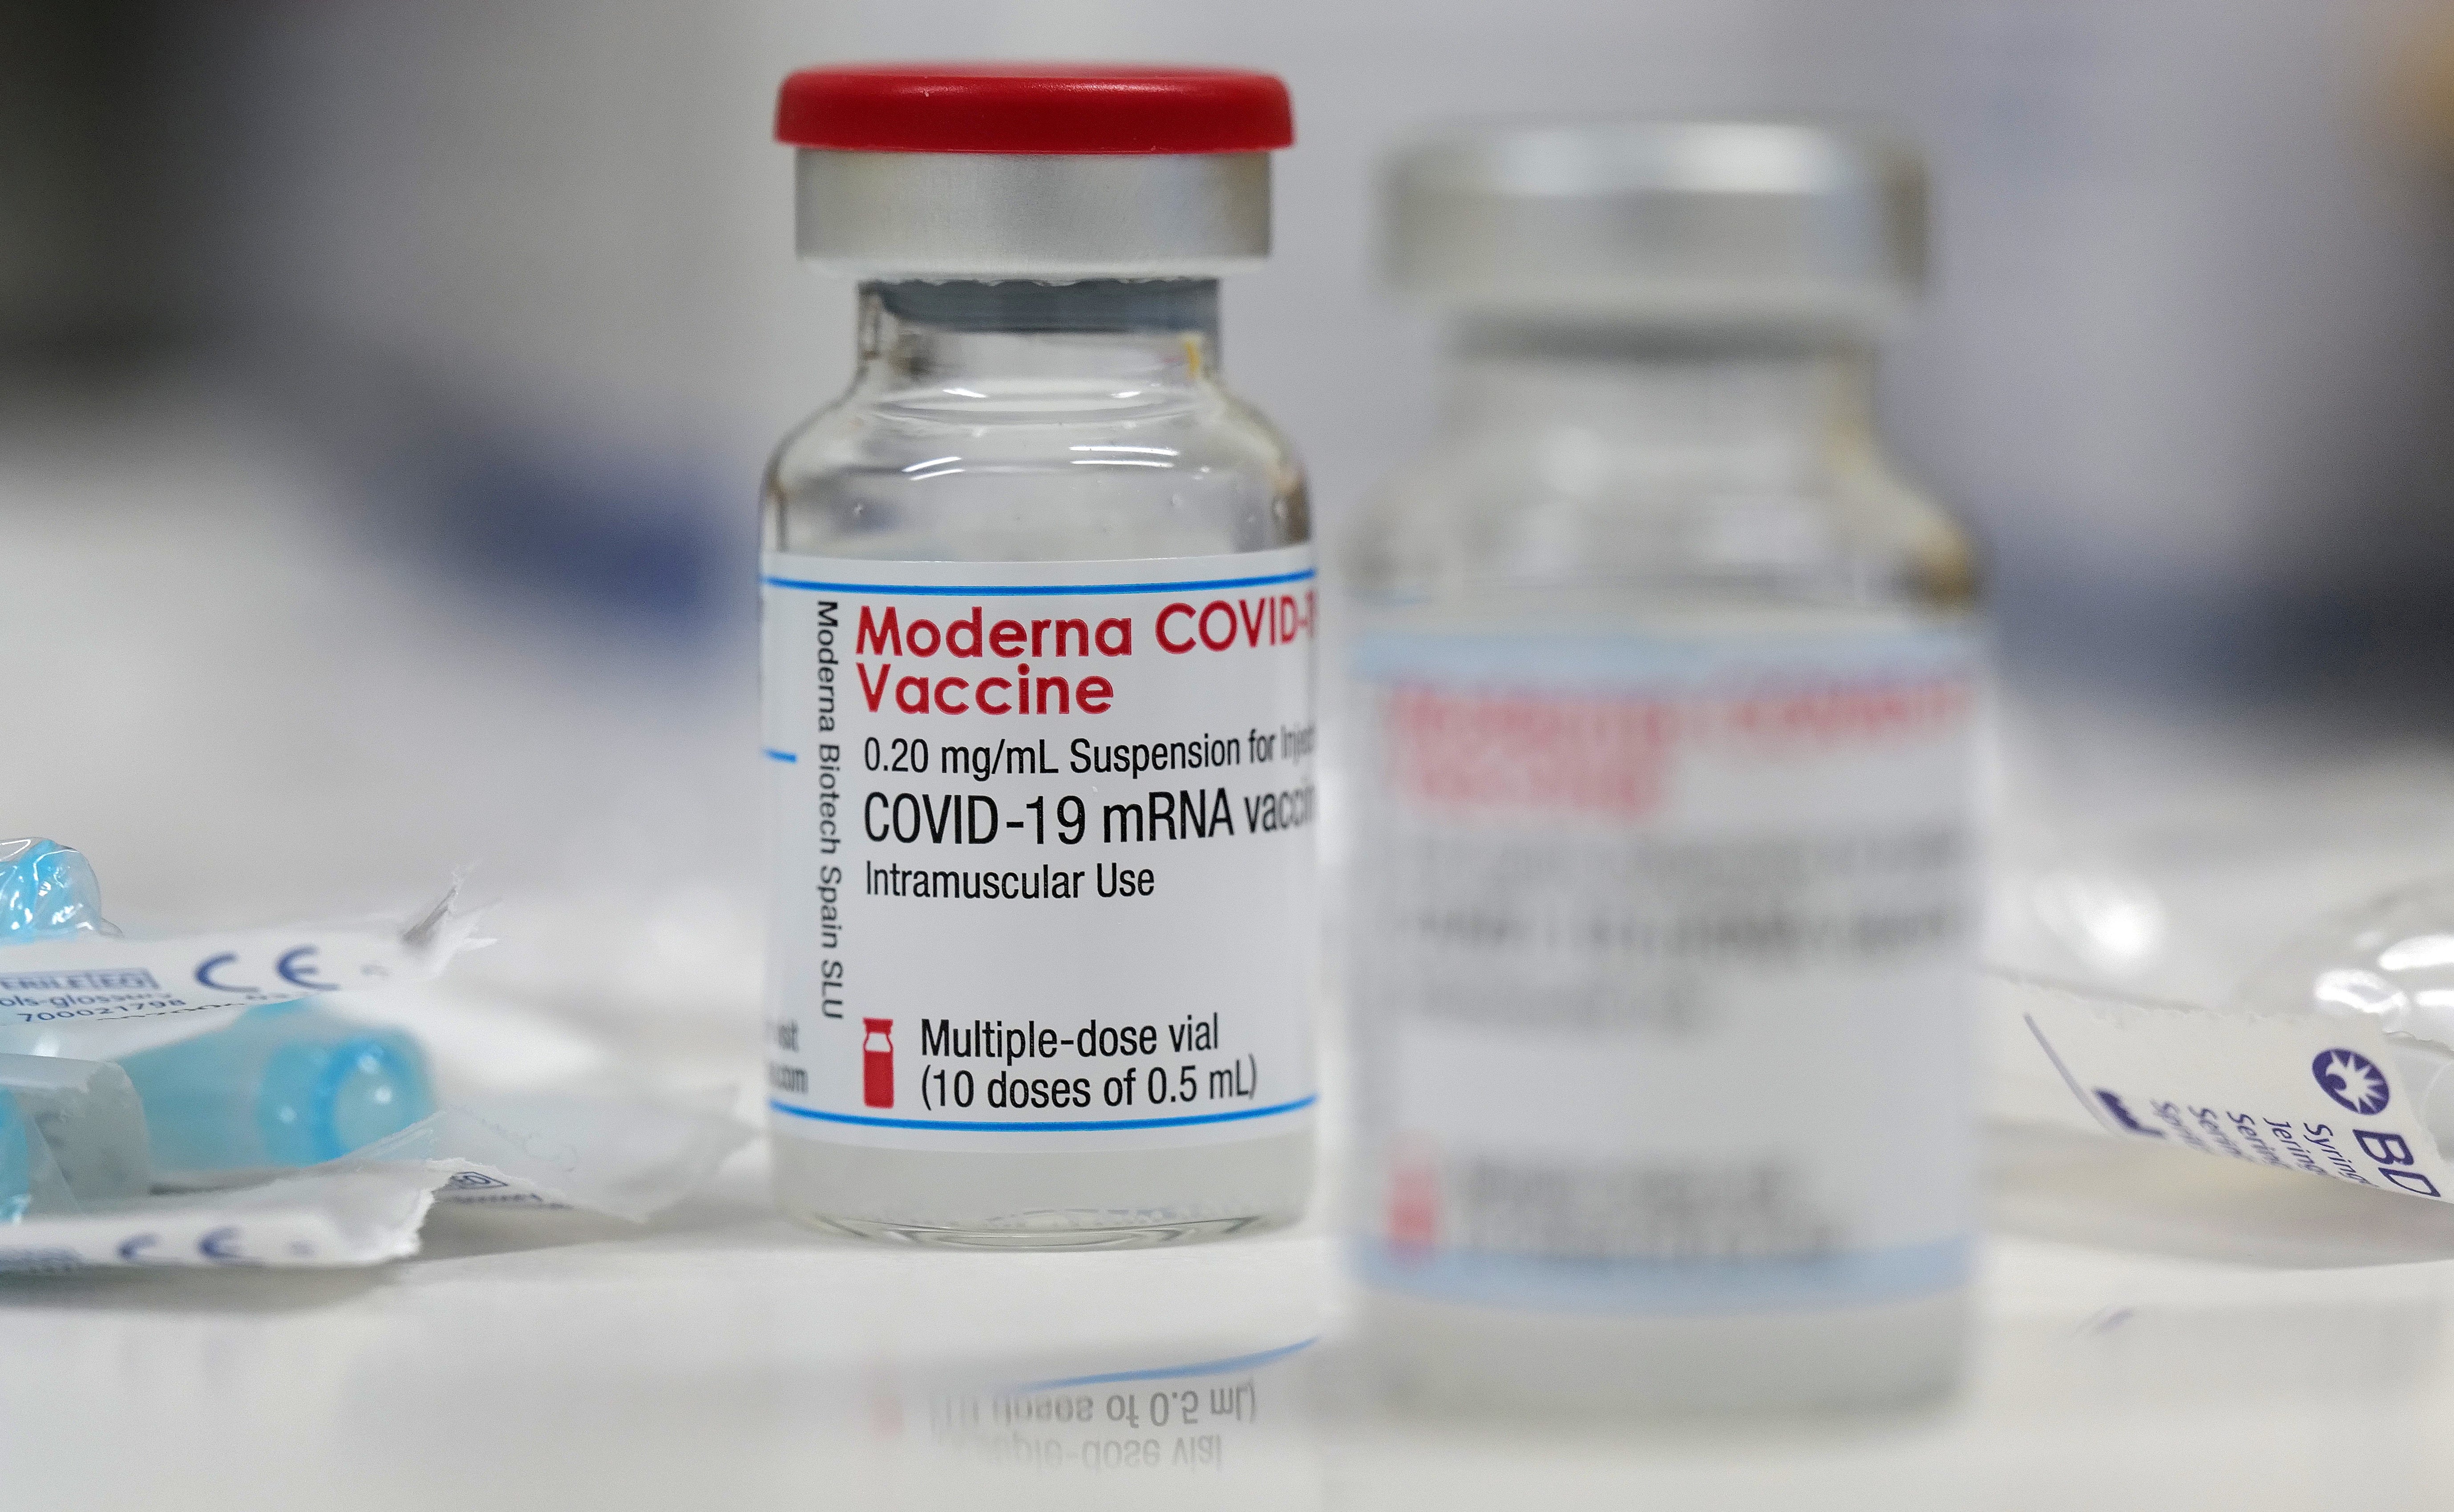 The doses of the Moderna coronavirus vaccine can be spaced six weeks apart, but pregnant women should avoid jab, says WHO